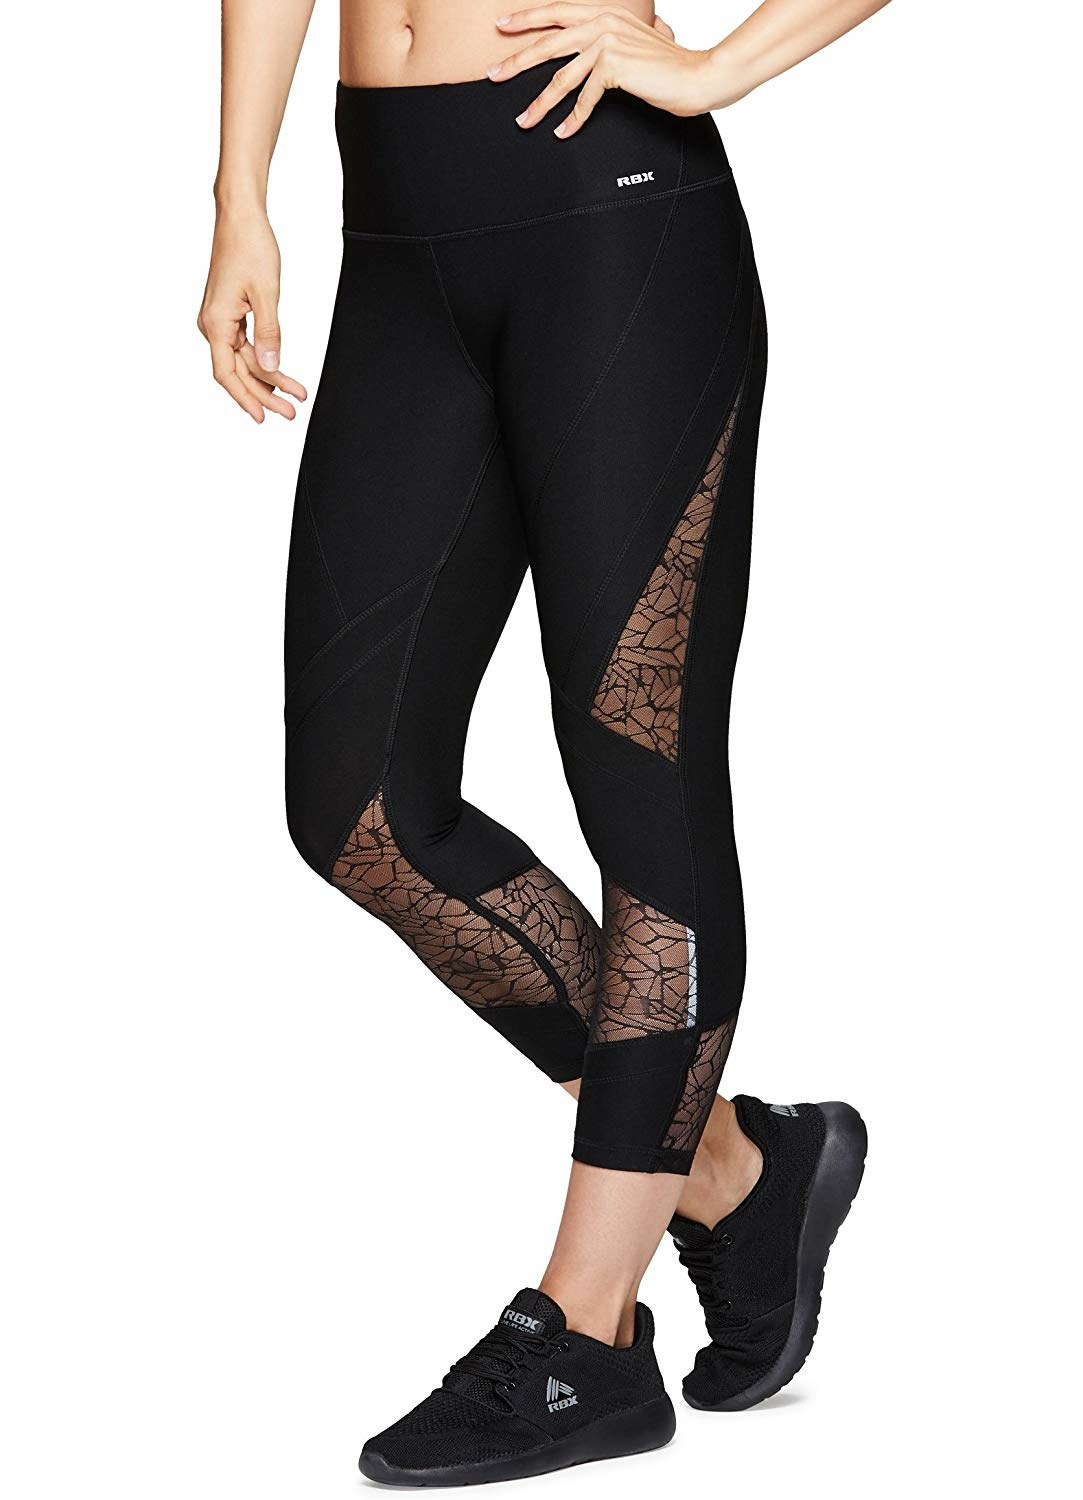 Active 7/8 Core Infinity Tights